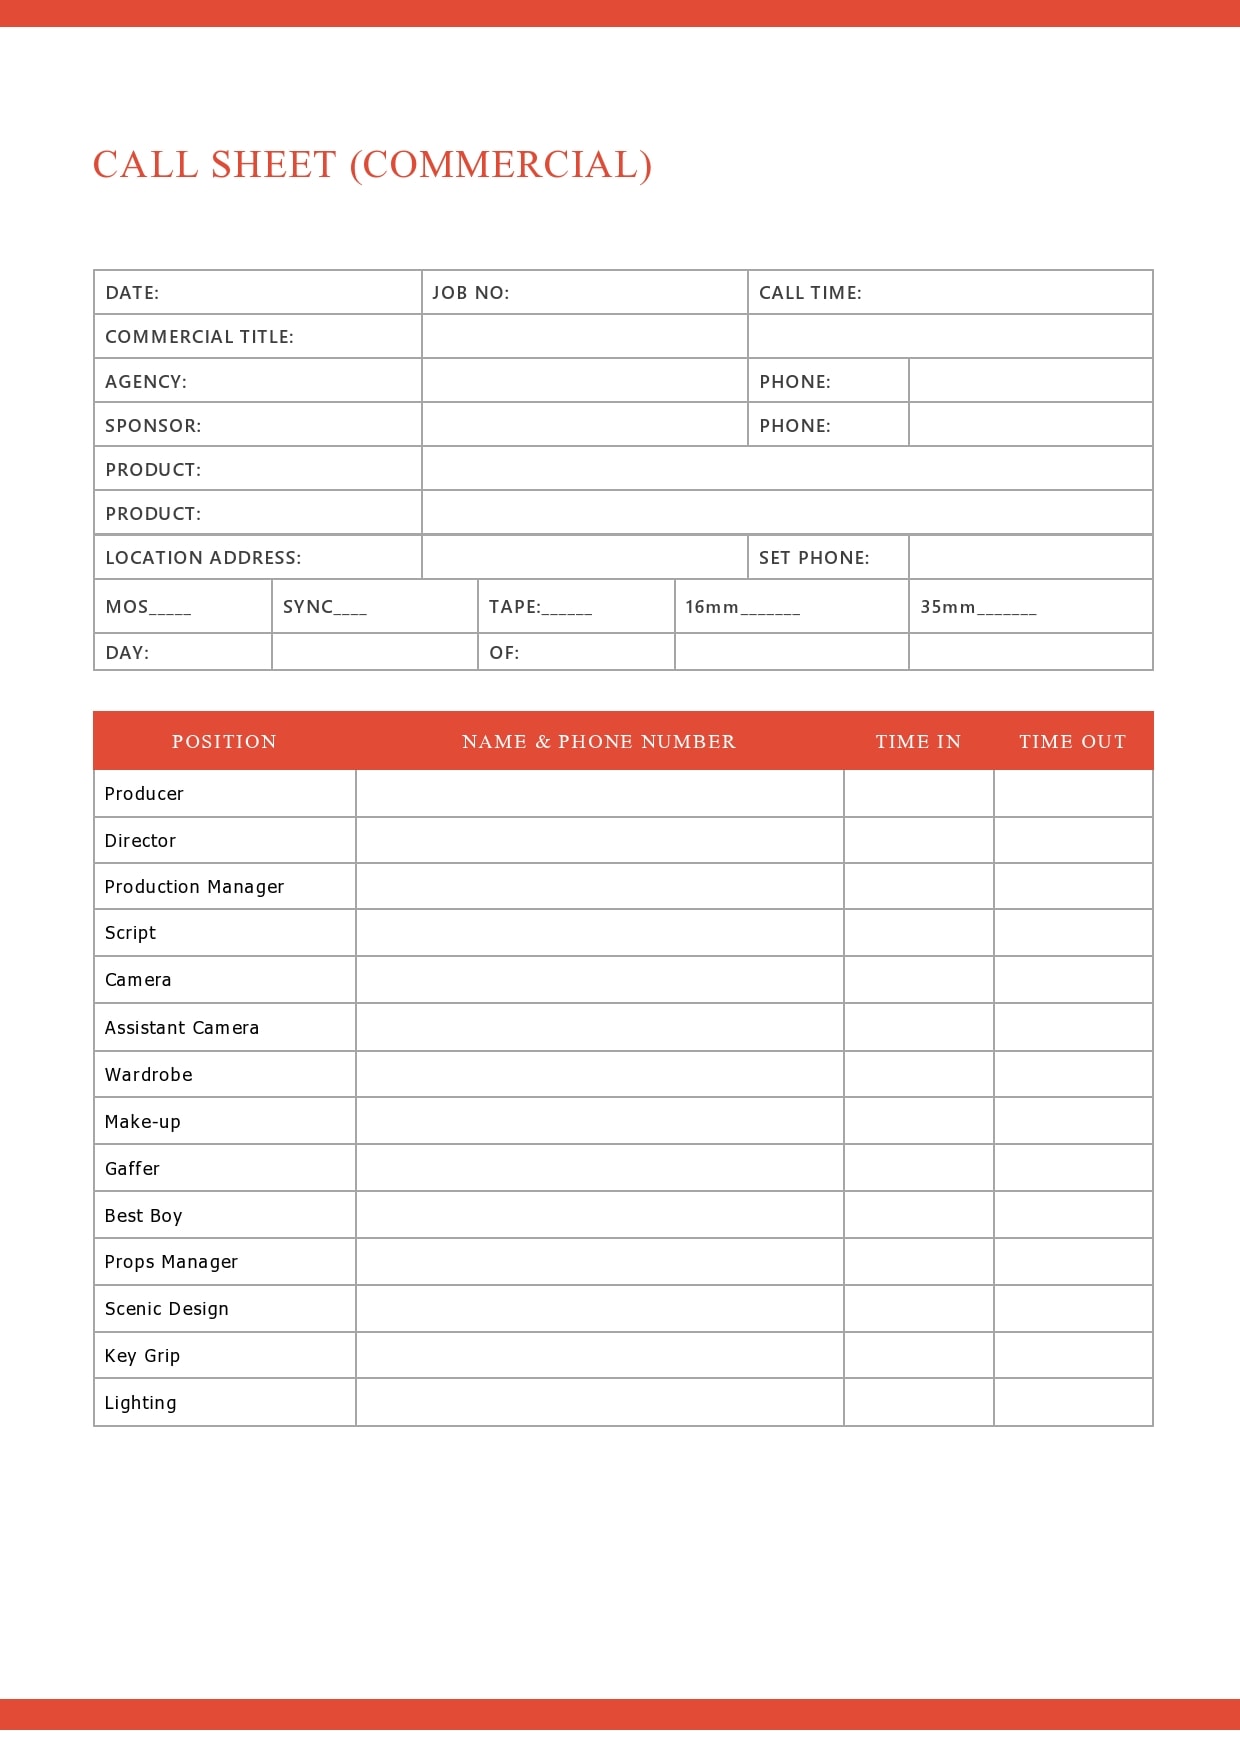 39 Simple Call Sheet Templates (FREE) TemplateArchive